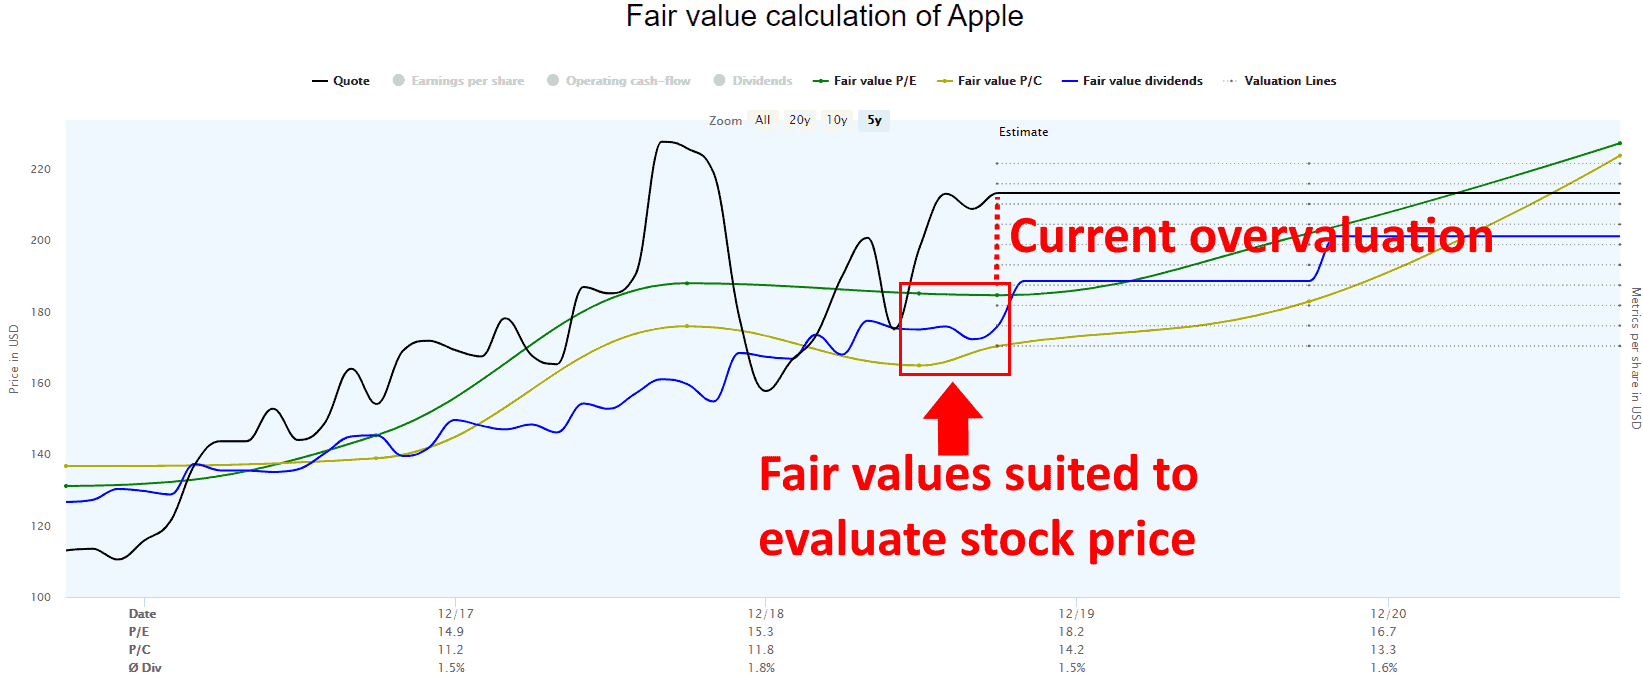 Current overvaluation of Apple stock